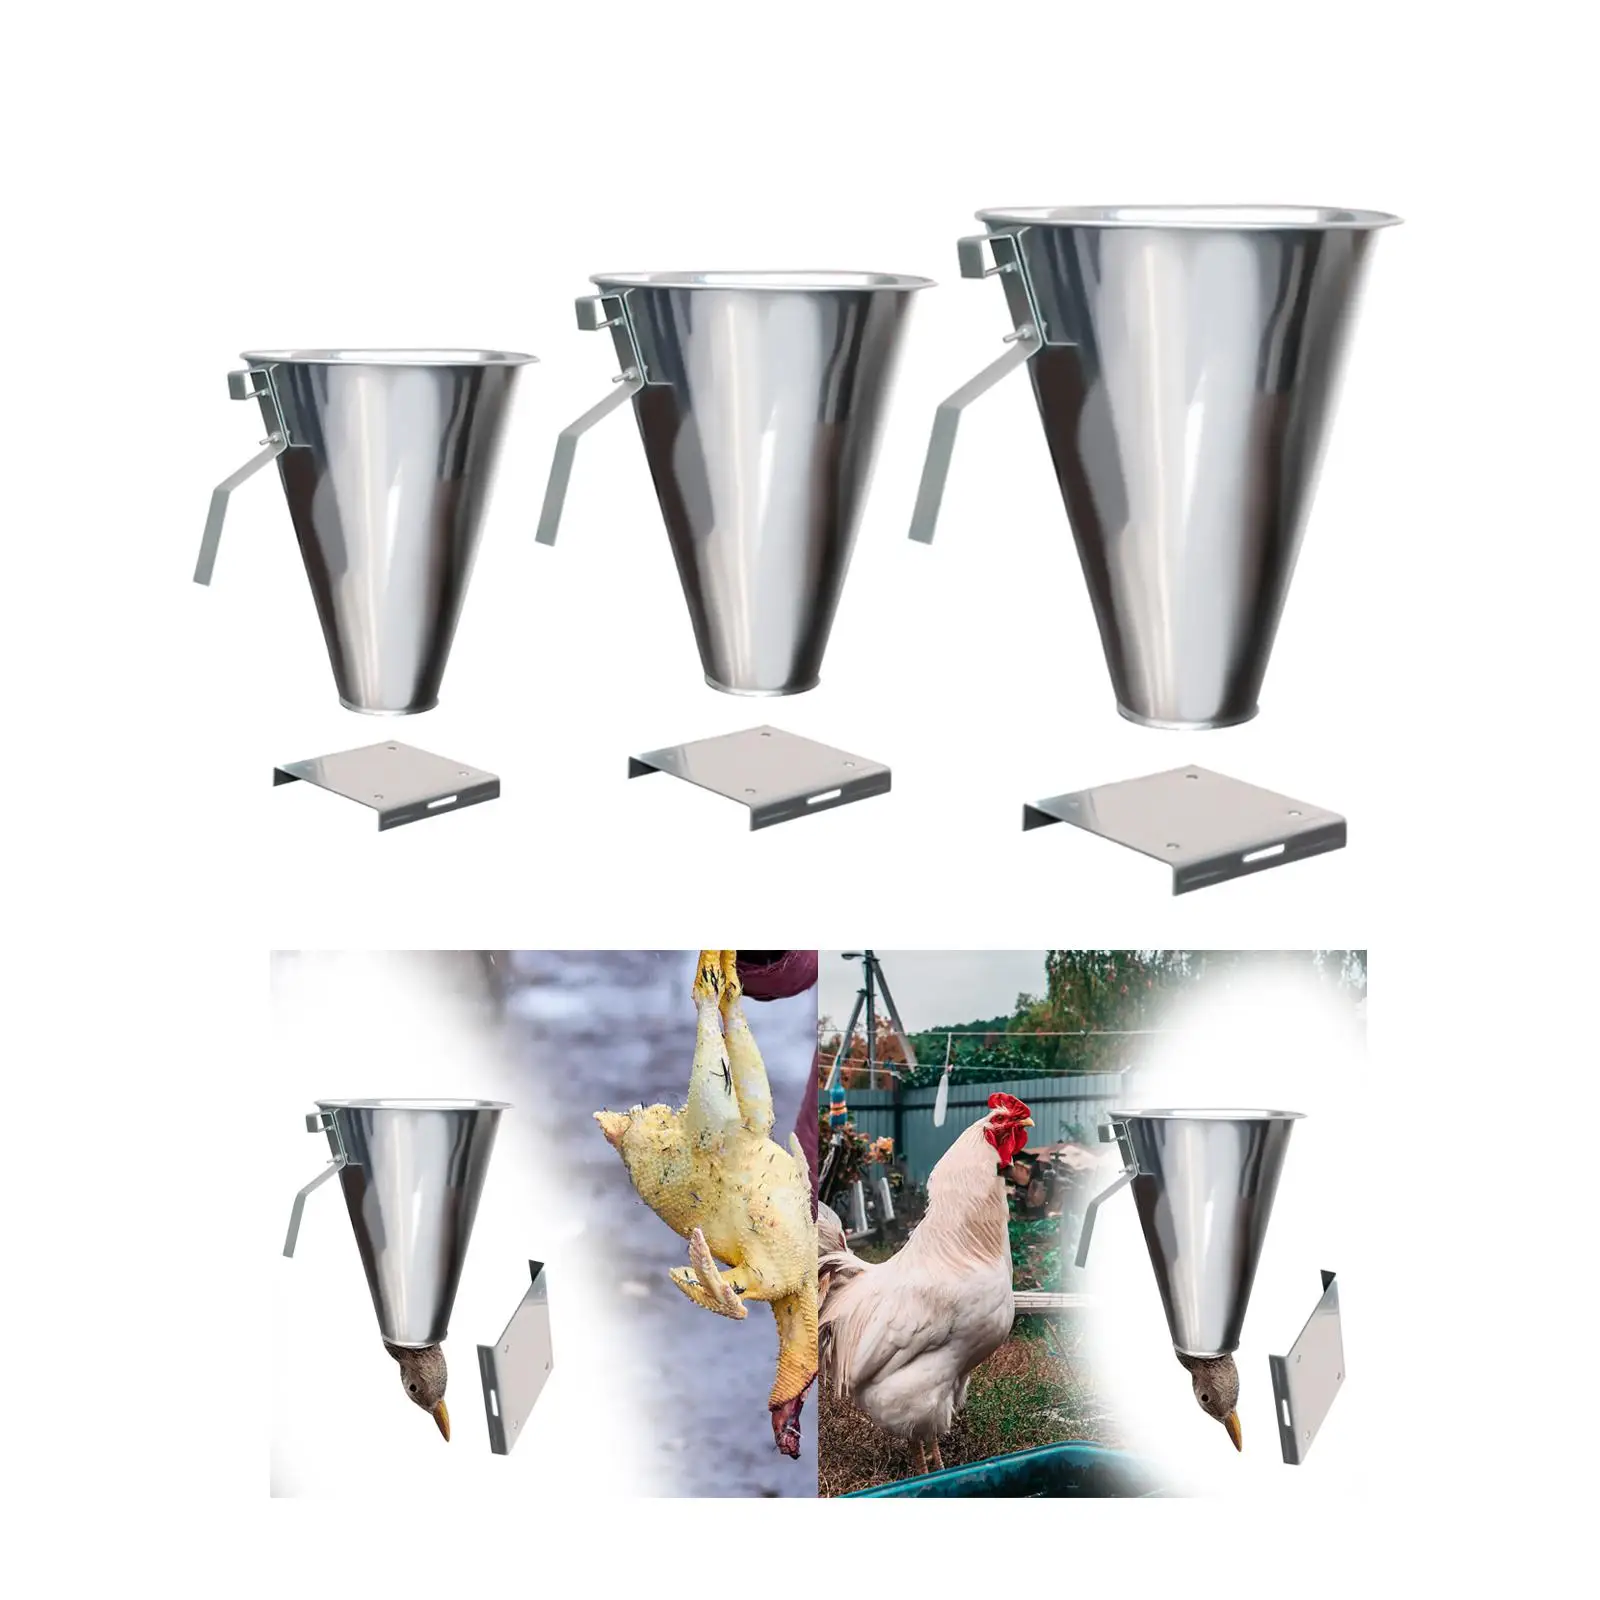 Poultry Retaining Cone Kill Chicken Cone Portable Slaughter Tool Iron Easy to Use Fittings Funnel Chicken Plucker for The